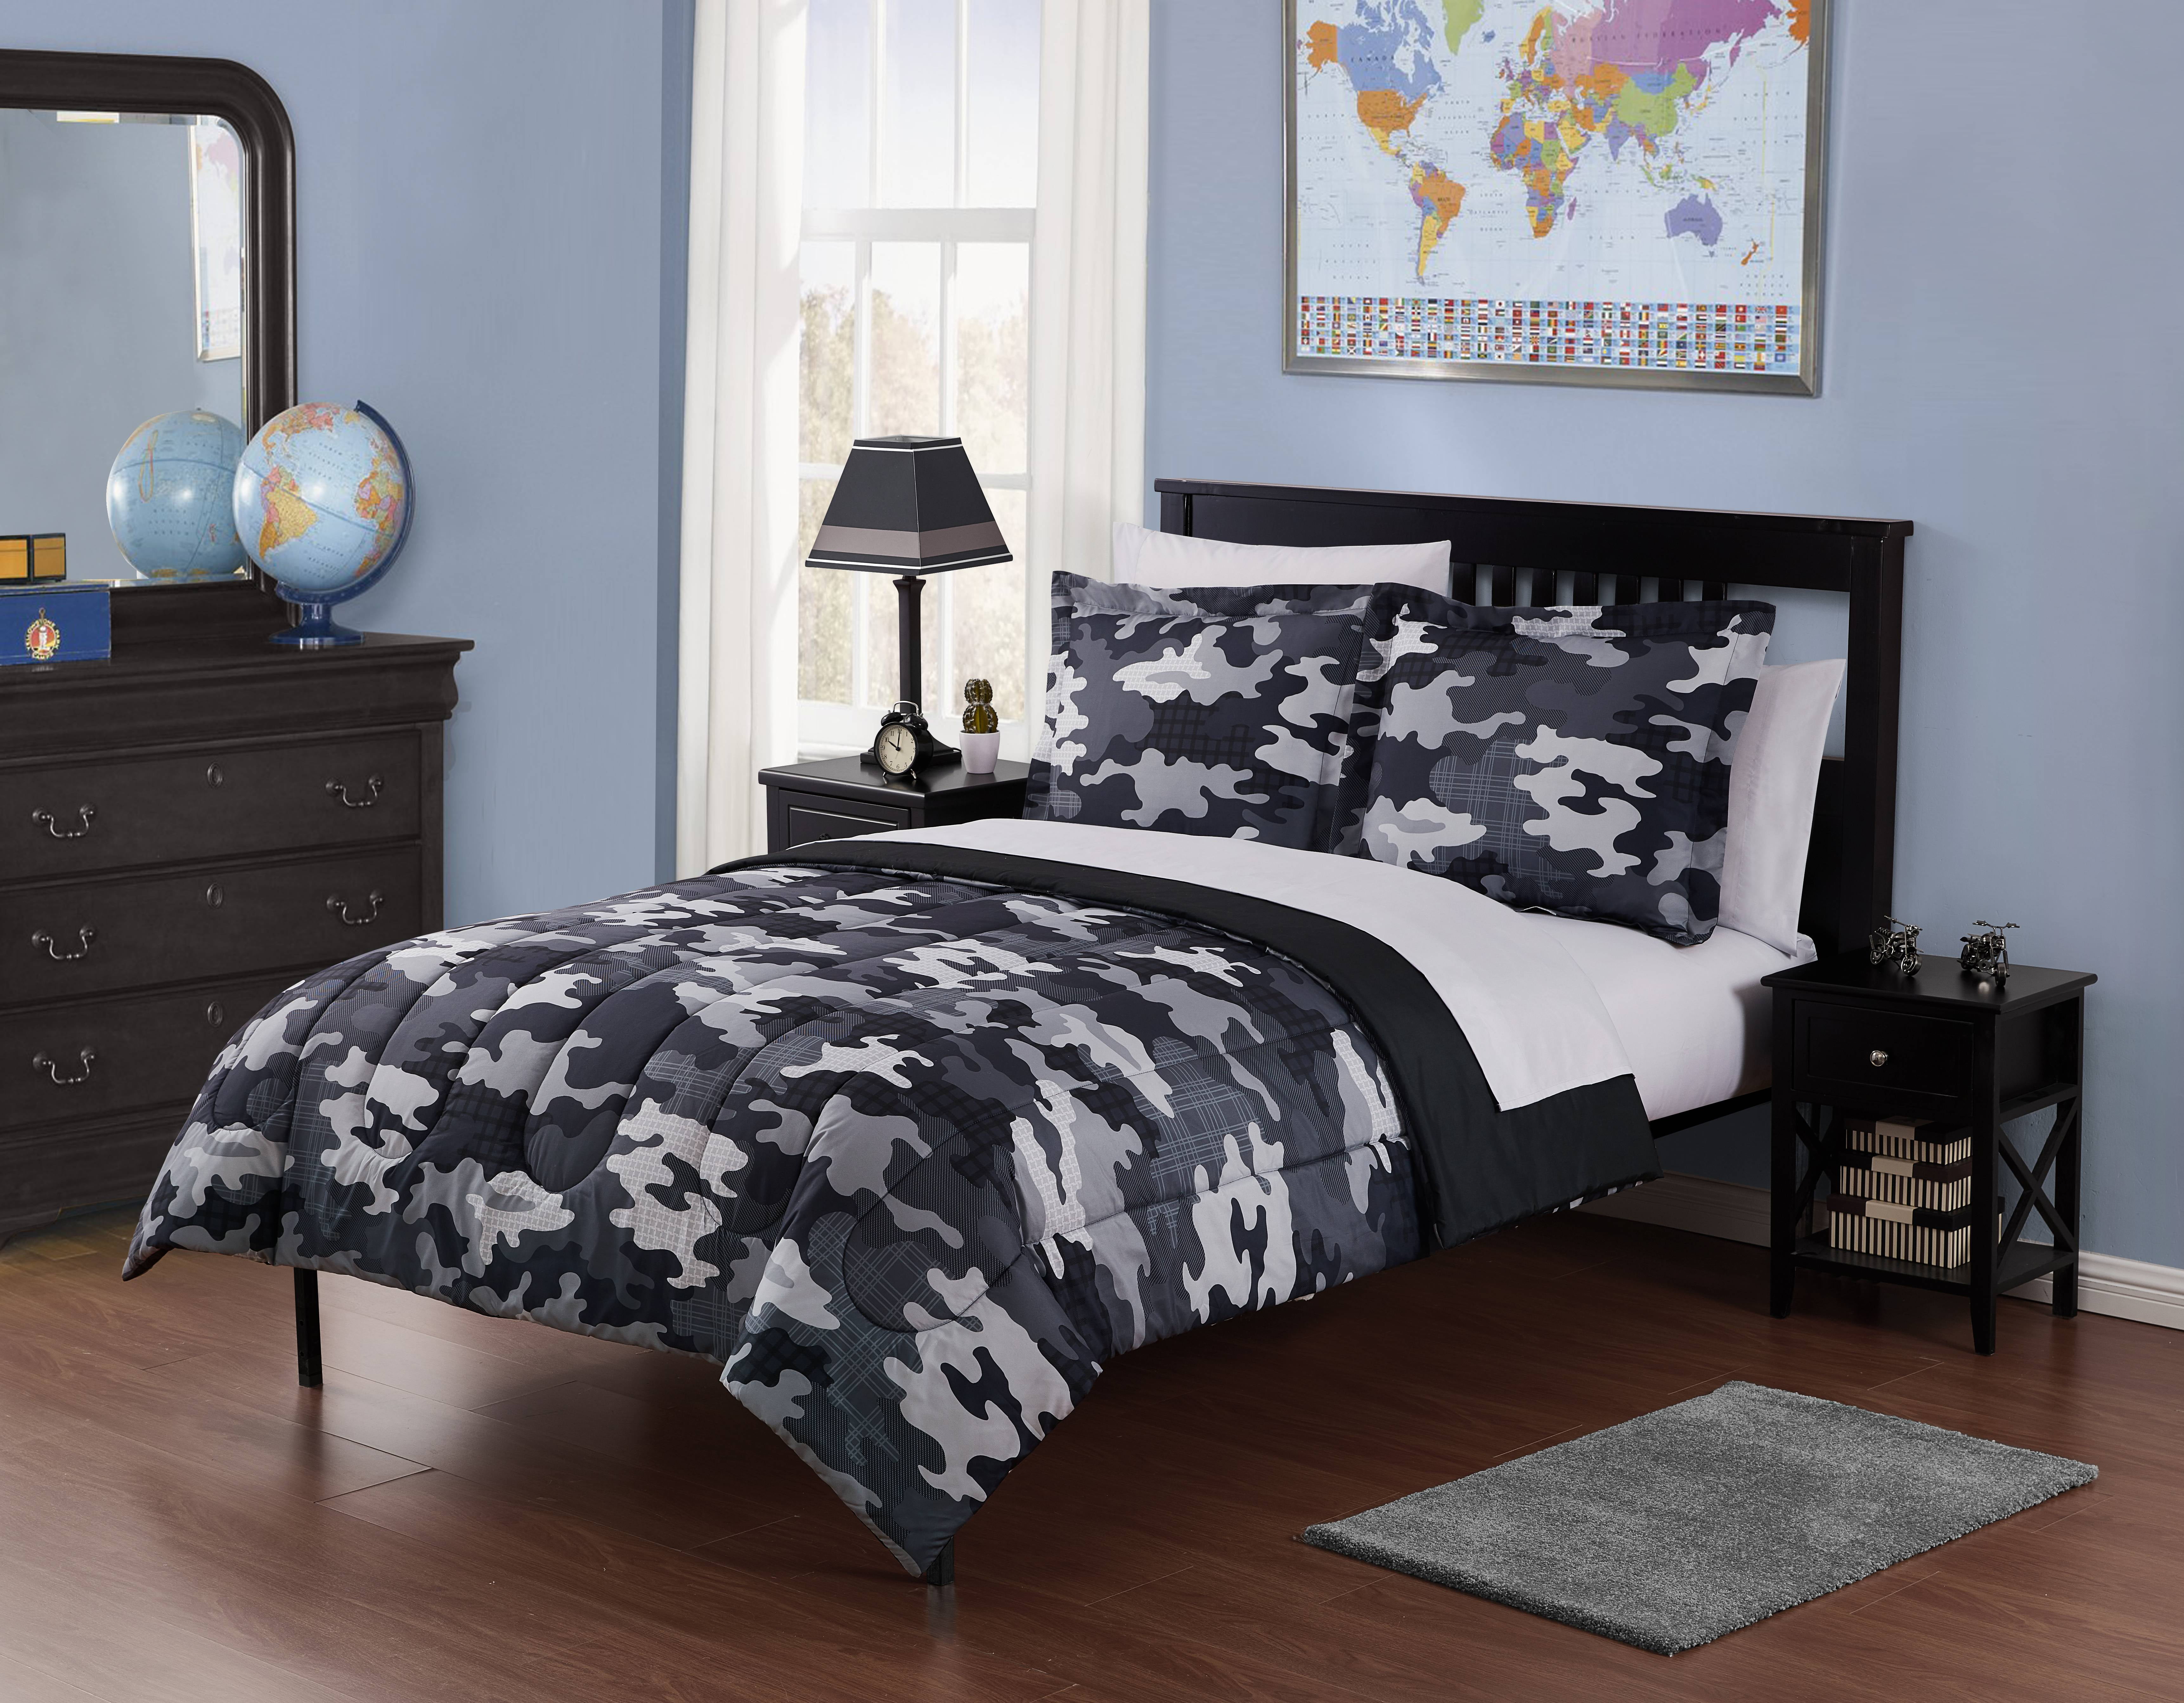 WHITE CAMO COMFORTER 12 PC BLACK SHEET SET QUEEN SIZE With Curtains 